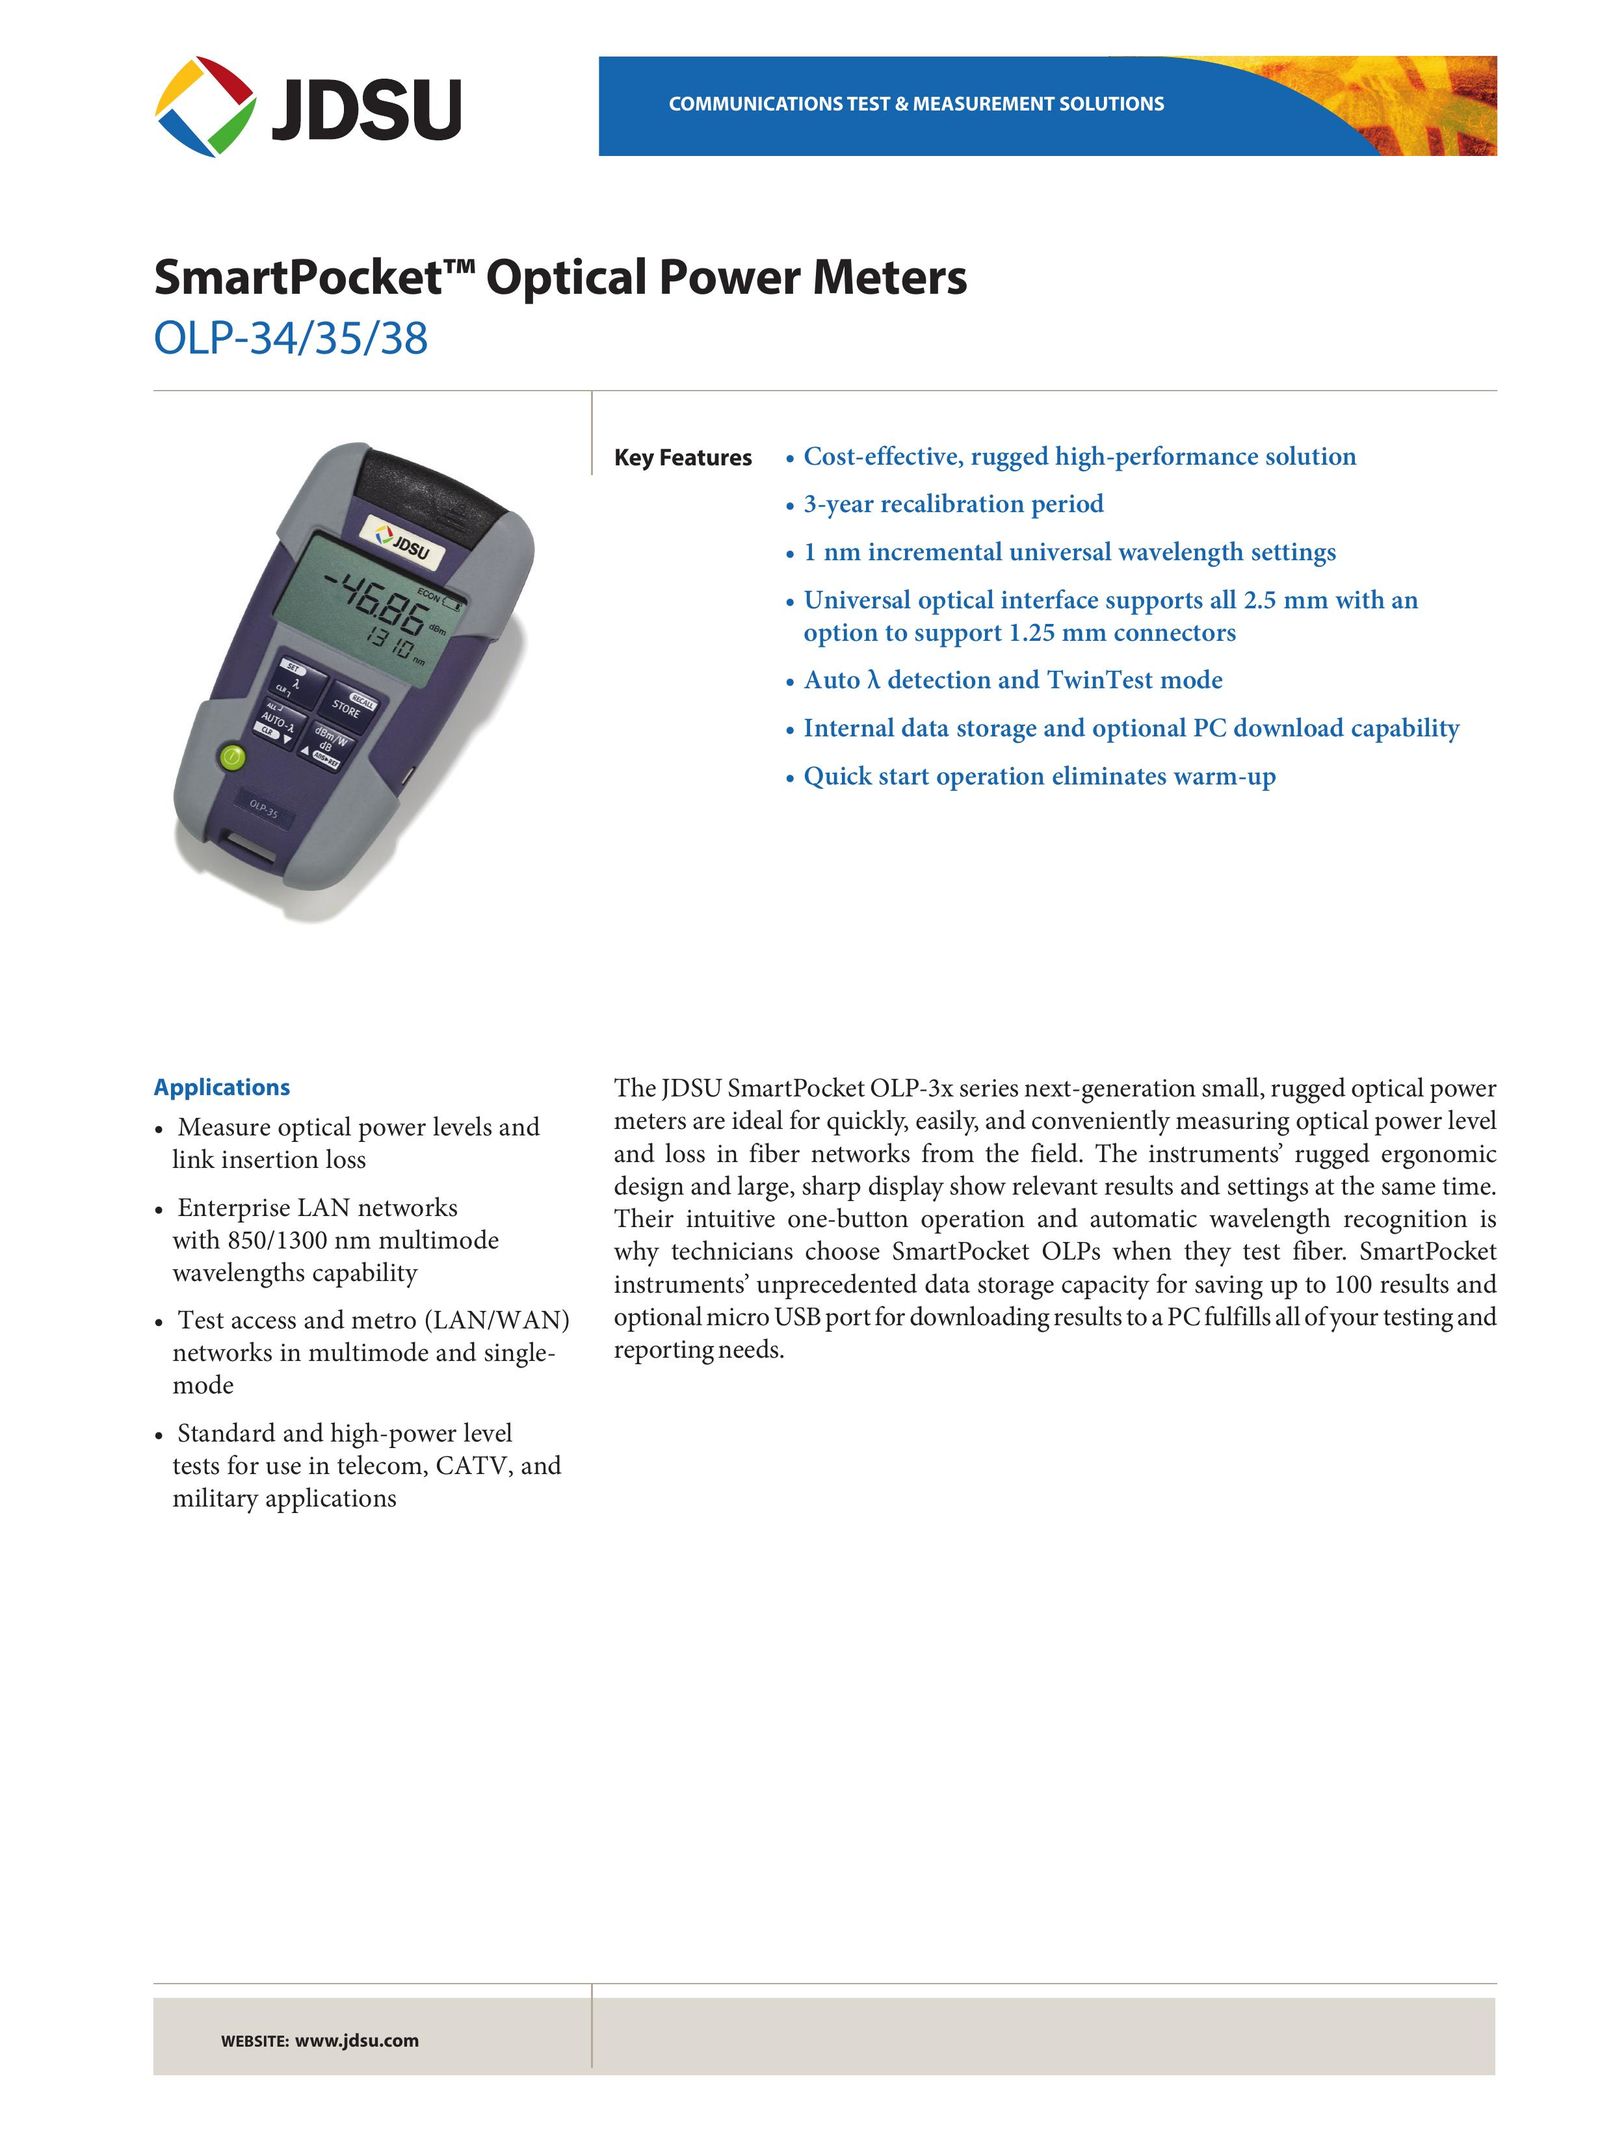 JDS Uniphase OLP-38 Electronic Accessory User Manual